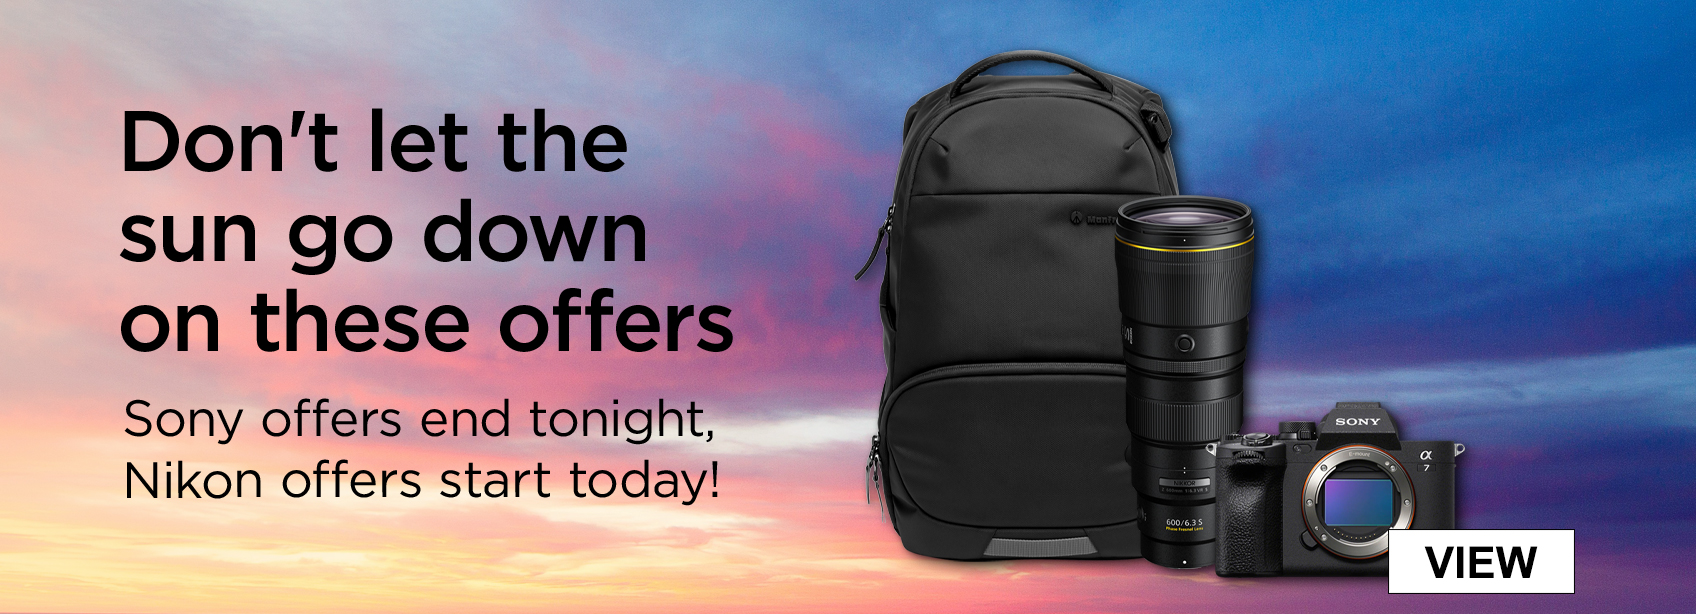 Don't let the sun go down on these offers. Sony offers end tonight, nikon offers start today!